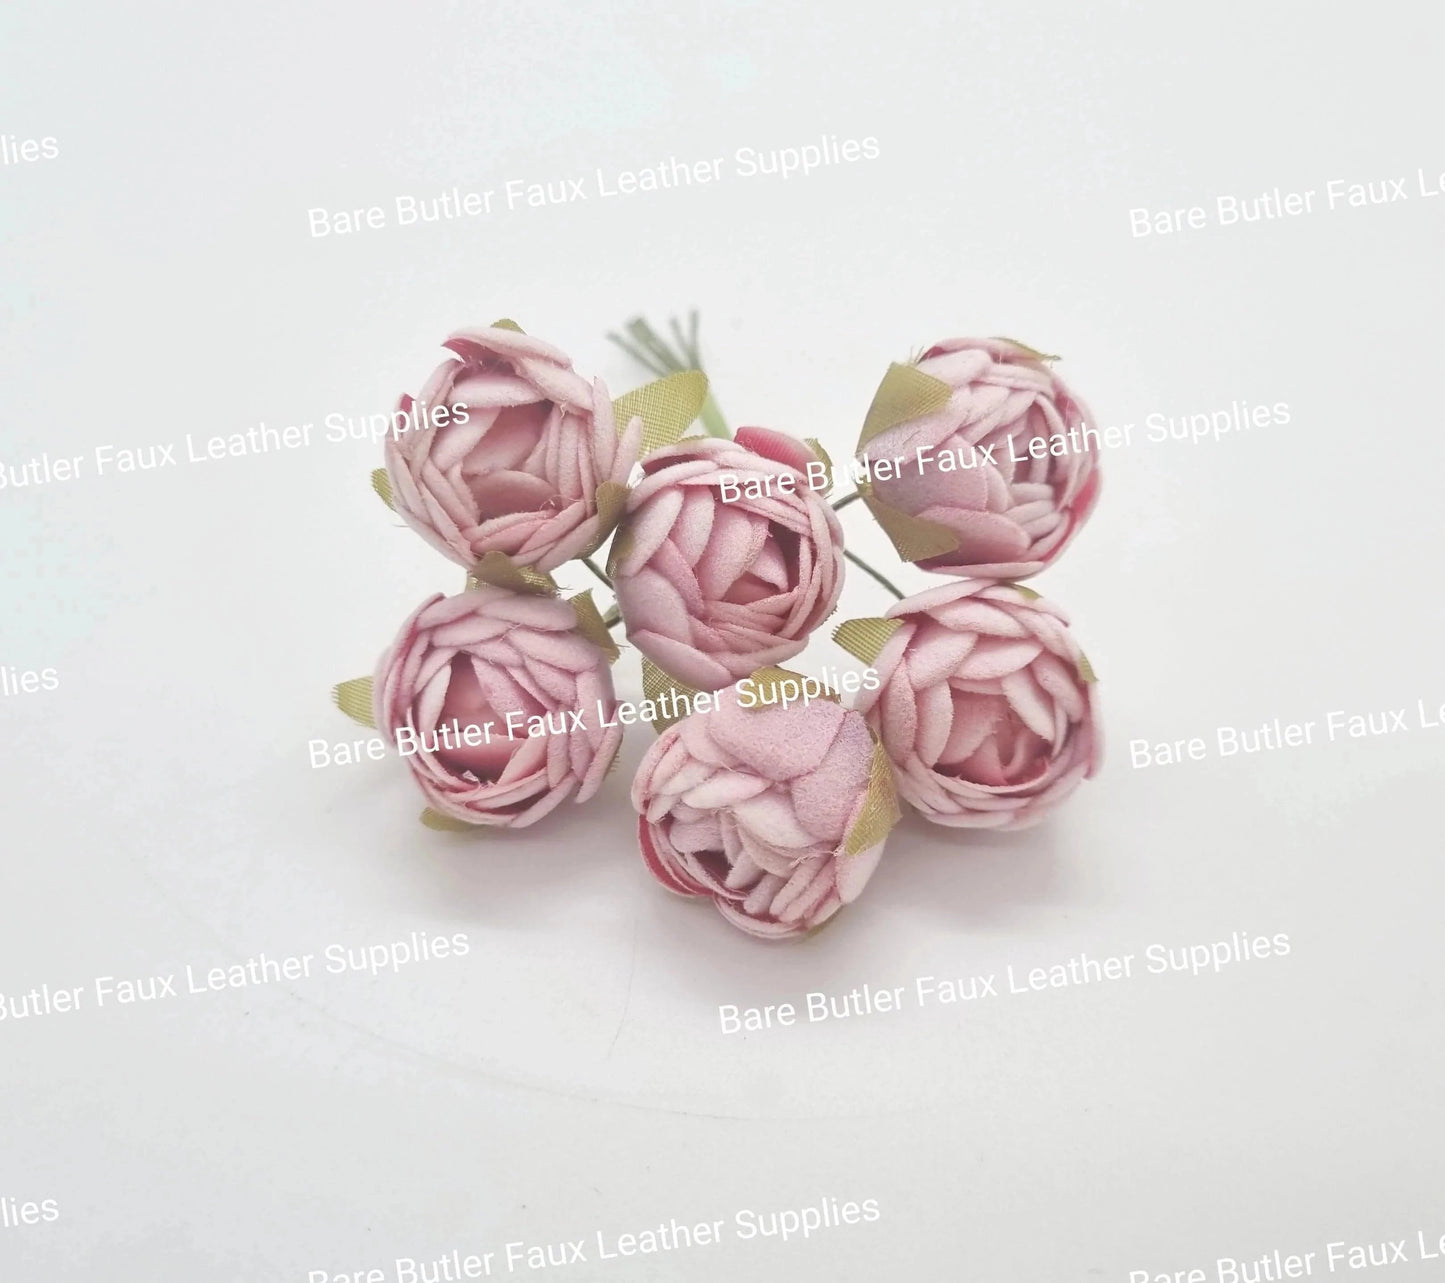 Mini Silk Rose Buds Pink - 6 pack - Embelishment, Flower - Bare Butler Faux Leather Supplies 